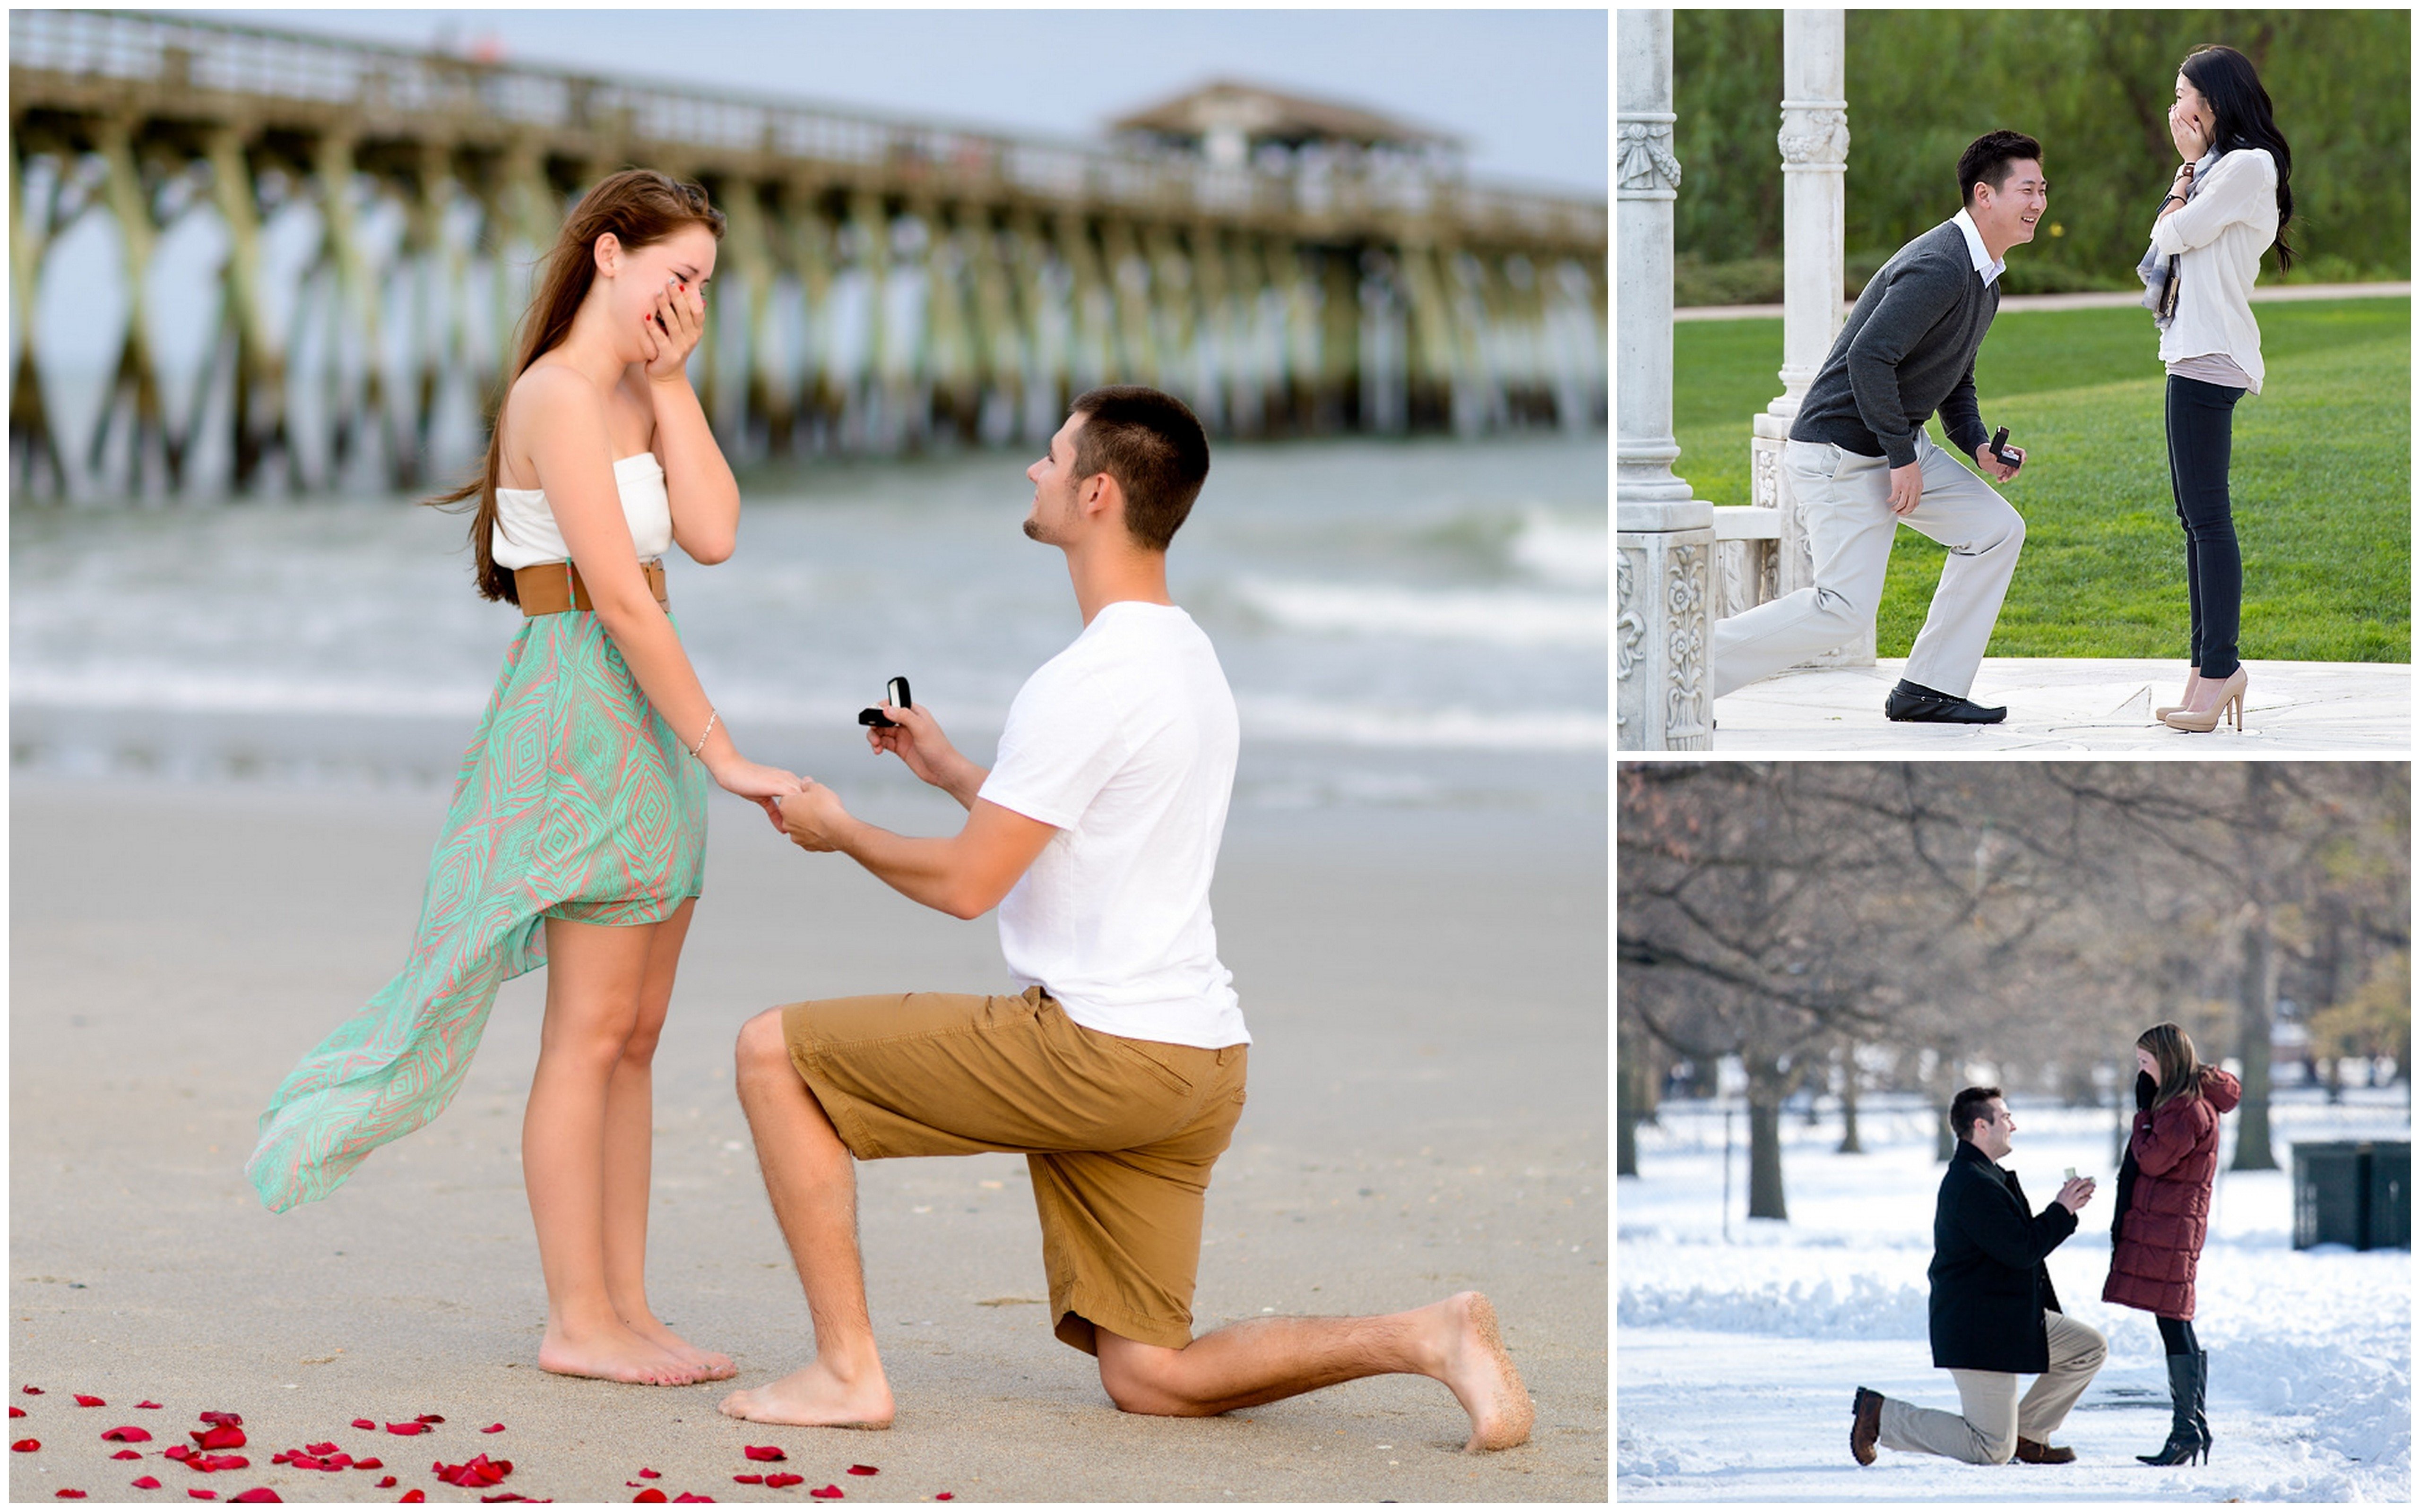 10 Stylish Marriage Proposal Ideas For Men happy national proposal day proposal ideas blog 2022